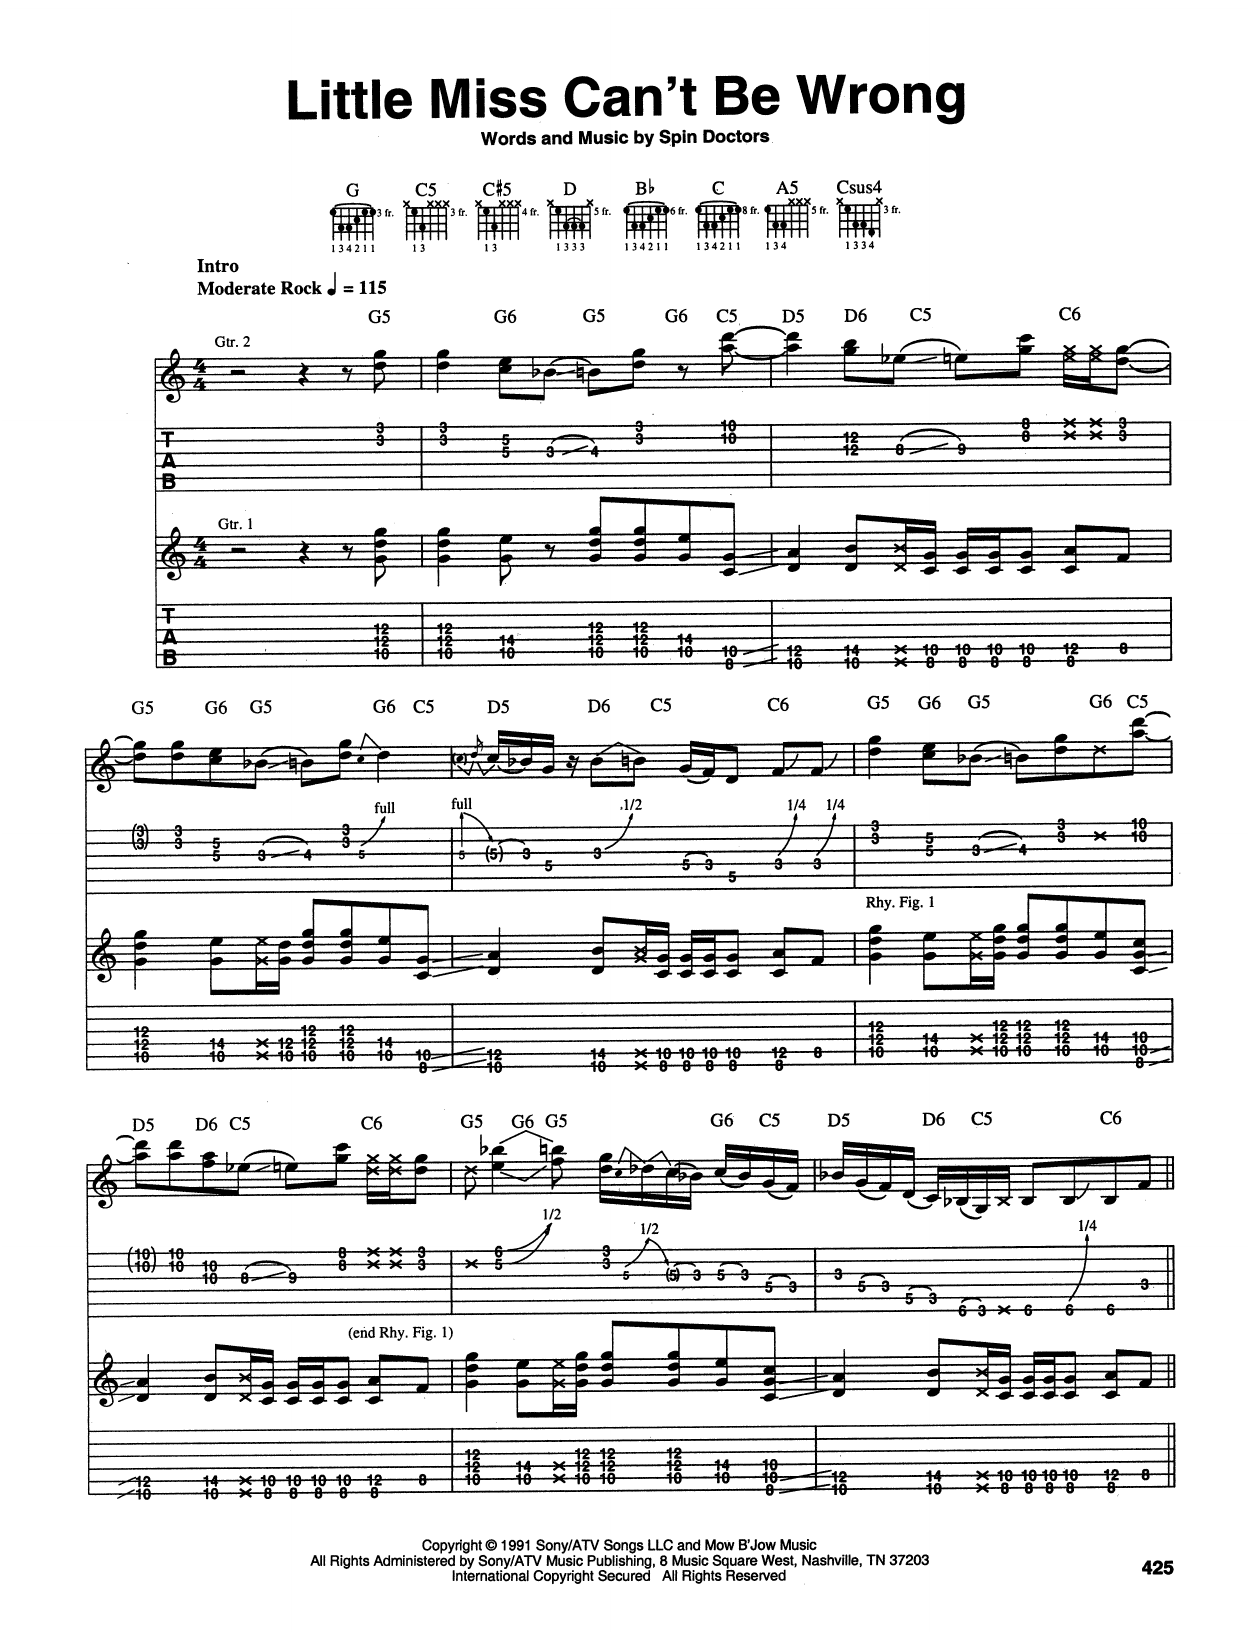 Download Spin Doctors Little Miss Can't Be Wrong Sheet Music